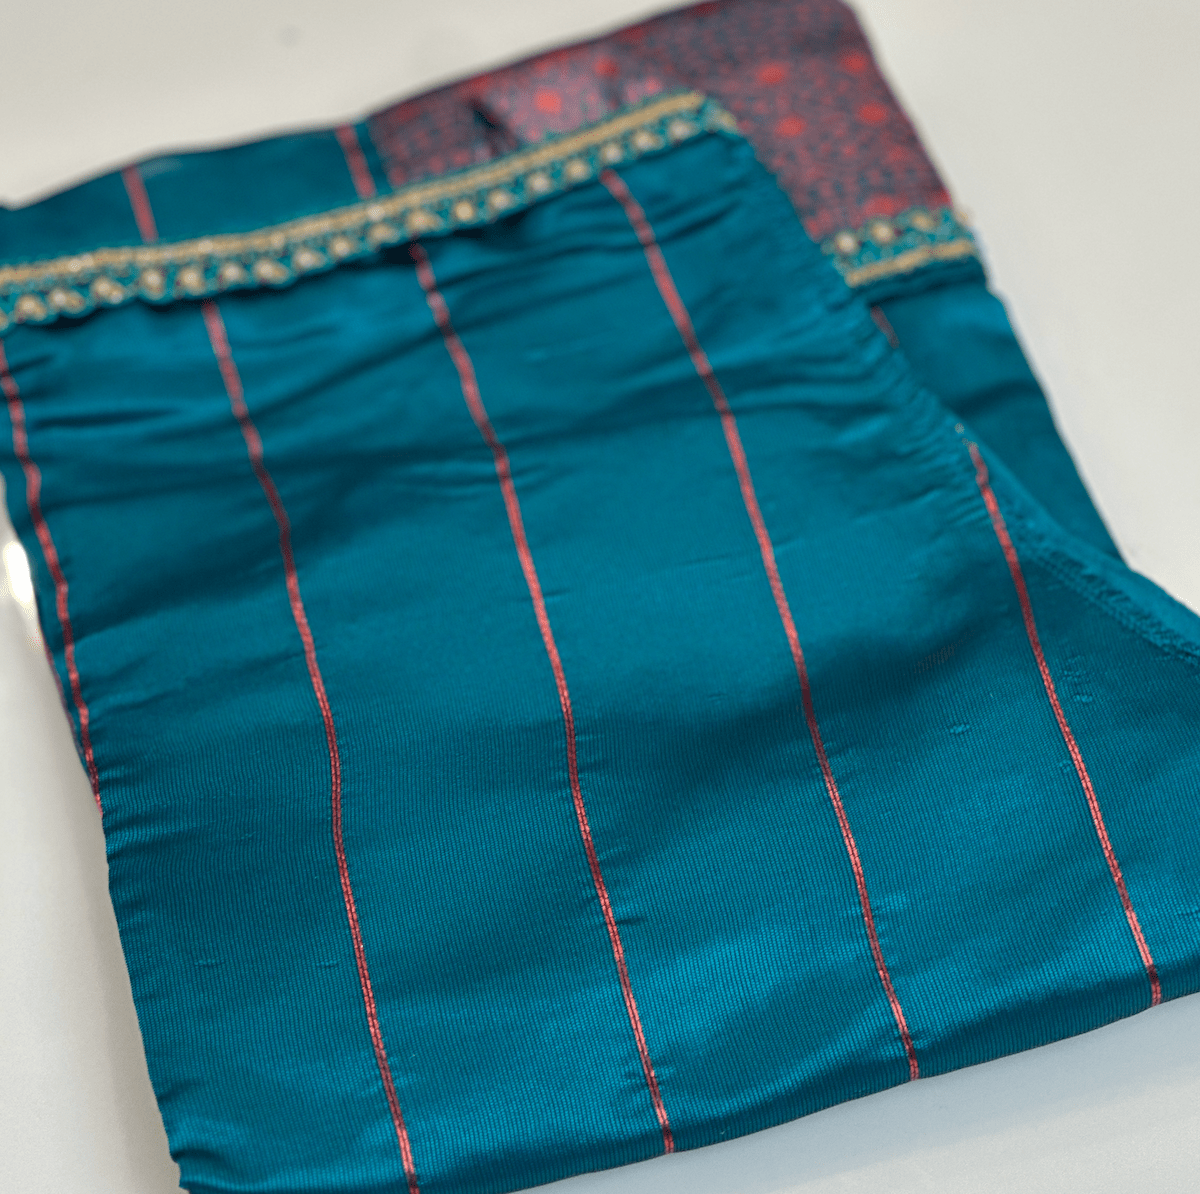 Elevate Everyday Handmade Sari Apron-Peacock Green with Copper Stripes 